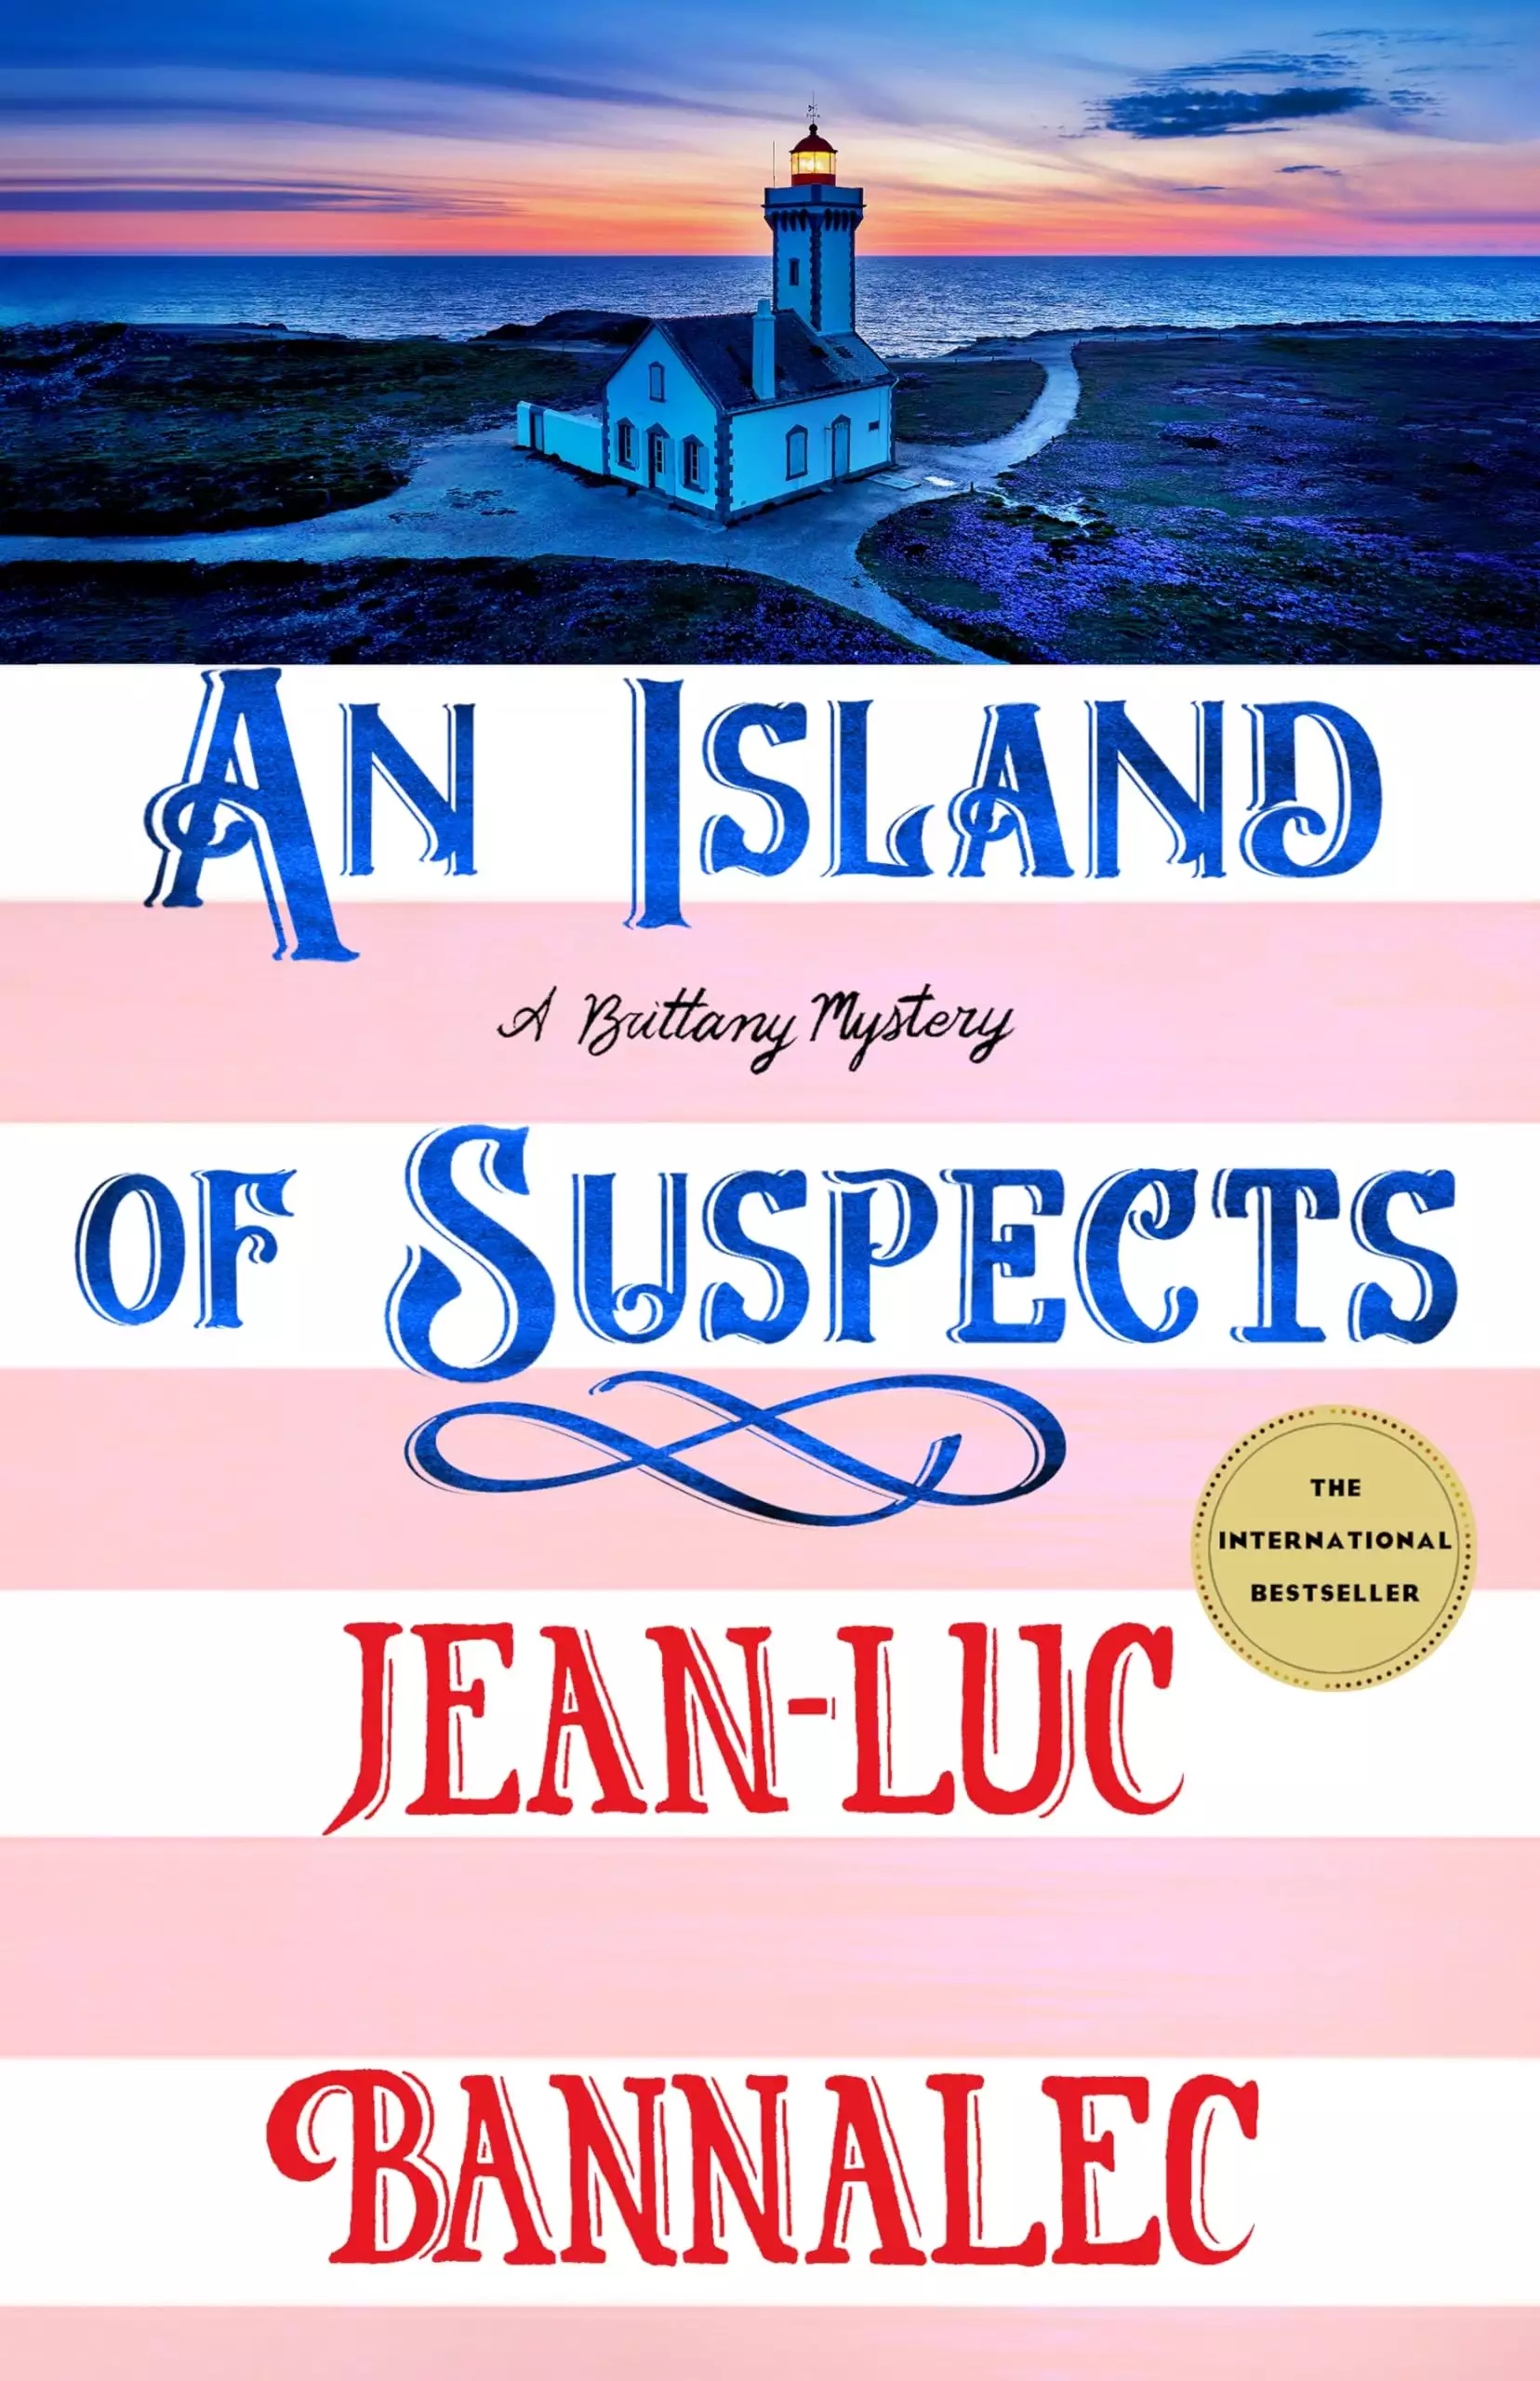 An Island of Suspects